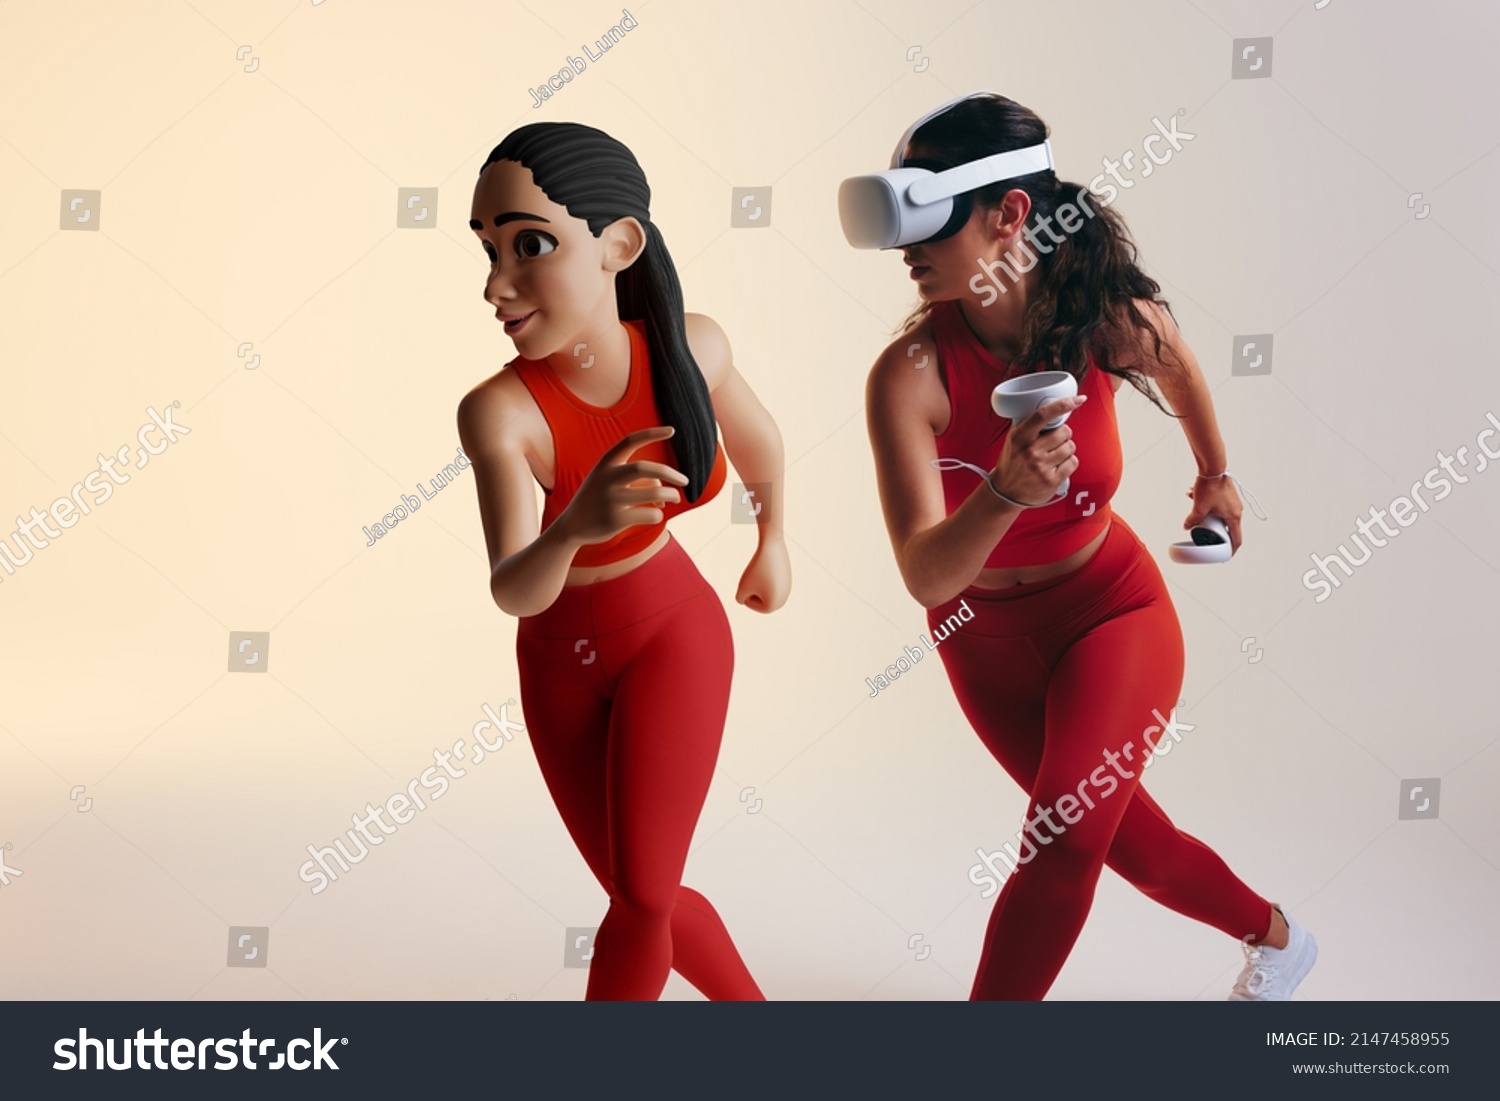 Fitness in the metaverse. Sporty young woman playing a virtual reality fitness game as a 3D avatar. Athletic young woman running with virtual reality goggles and controllers. #2147458955